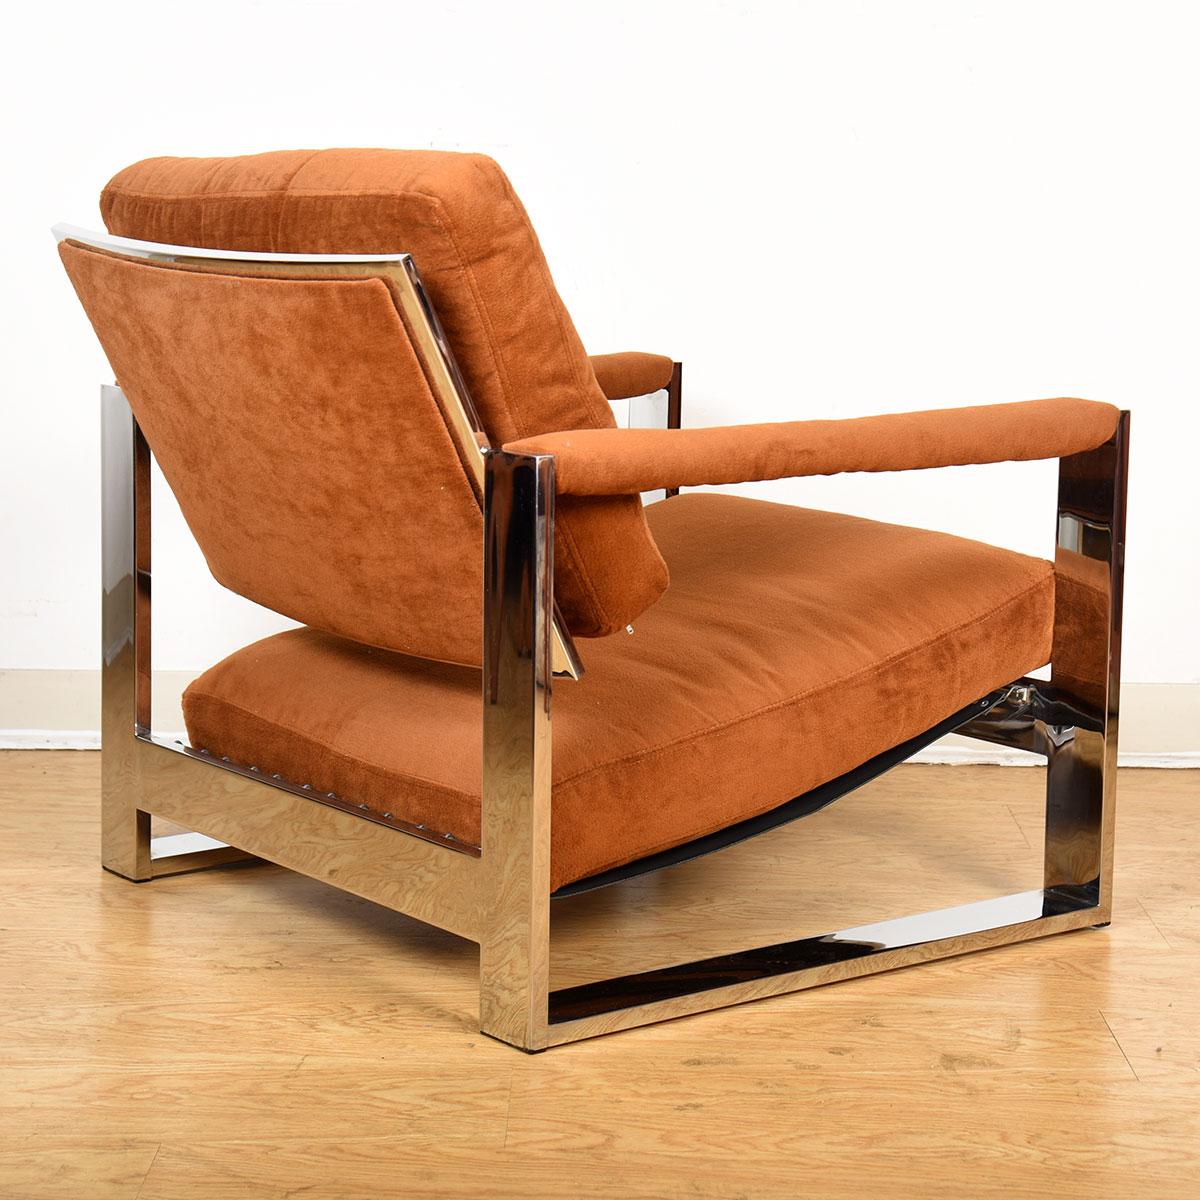 Mid-Century Modern Midcentury Chrome Lounge Chair by Milo Baughman For Sale